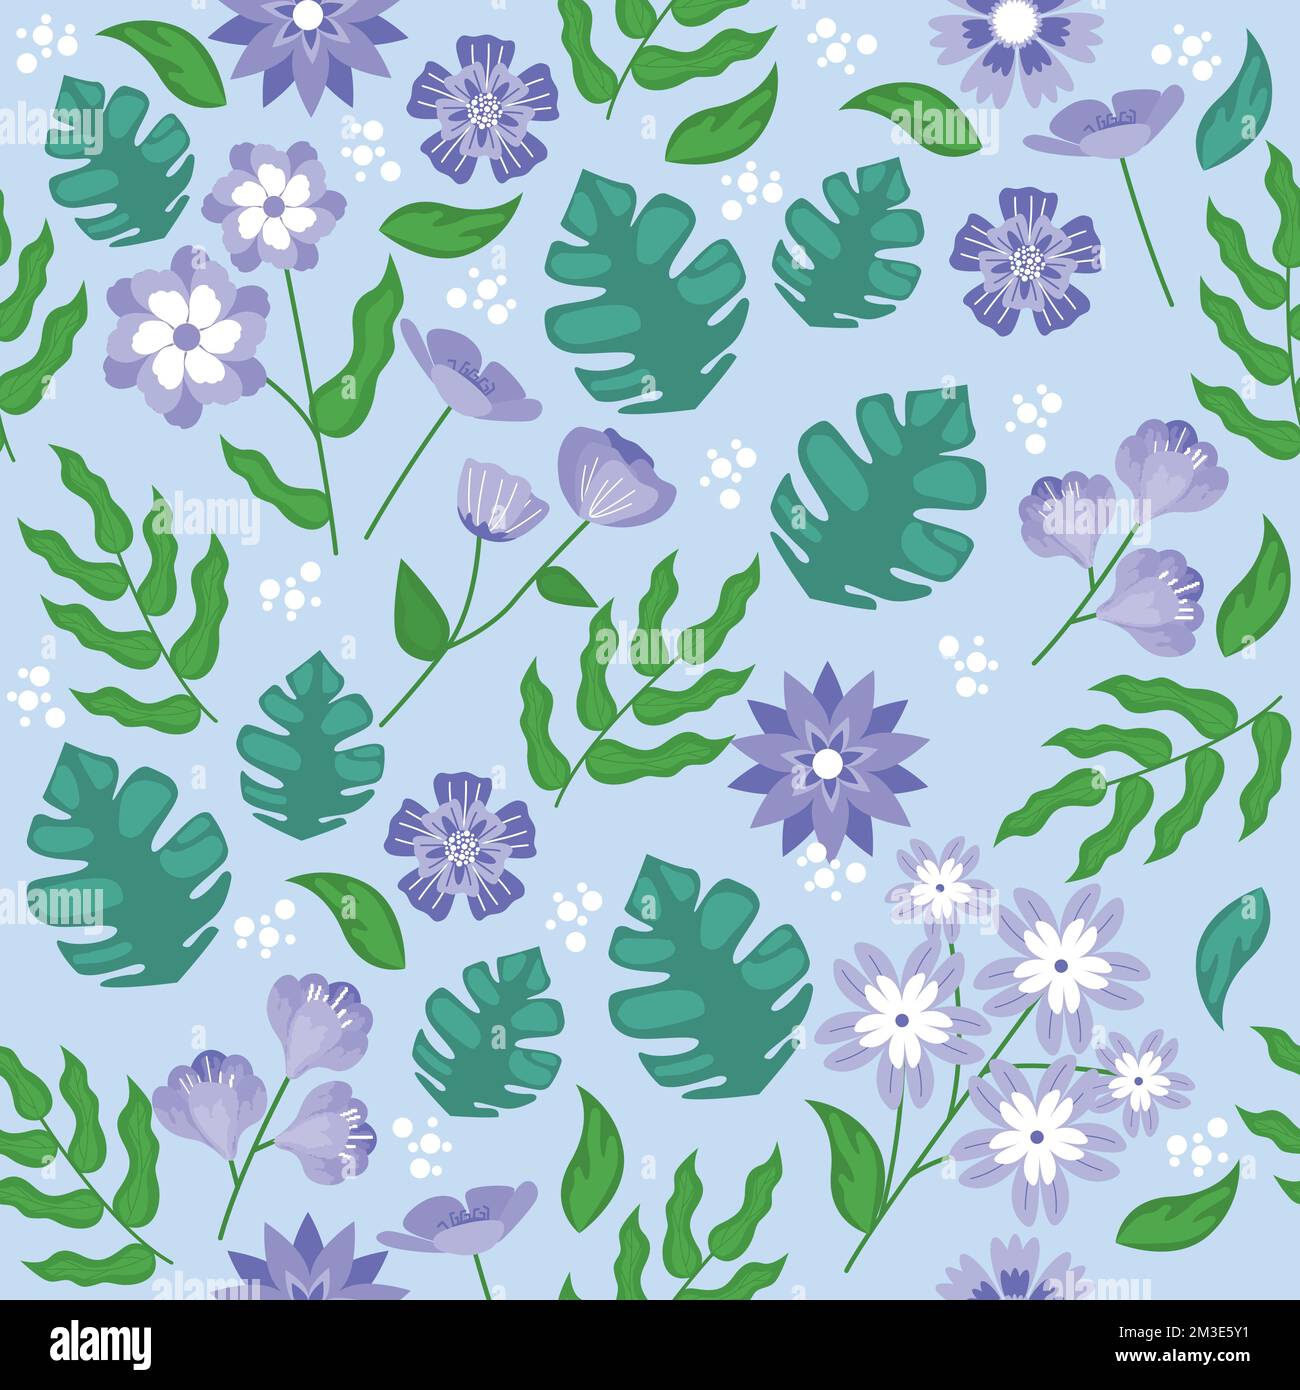 Floral Flower Nature Blue Background Seamless Pattern Wallpaper Stock Vector